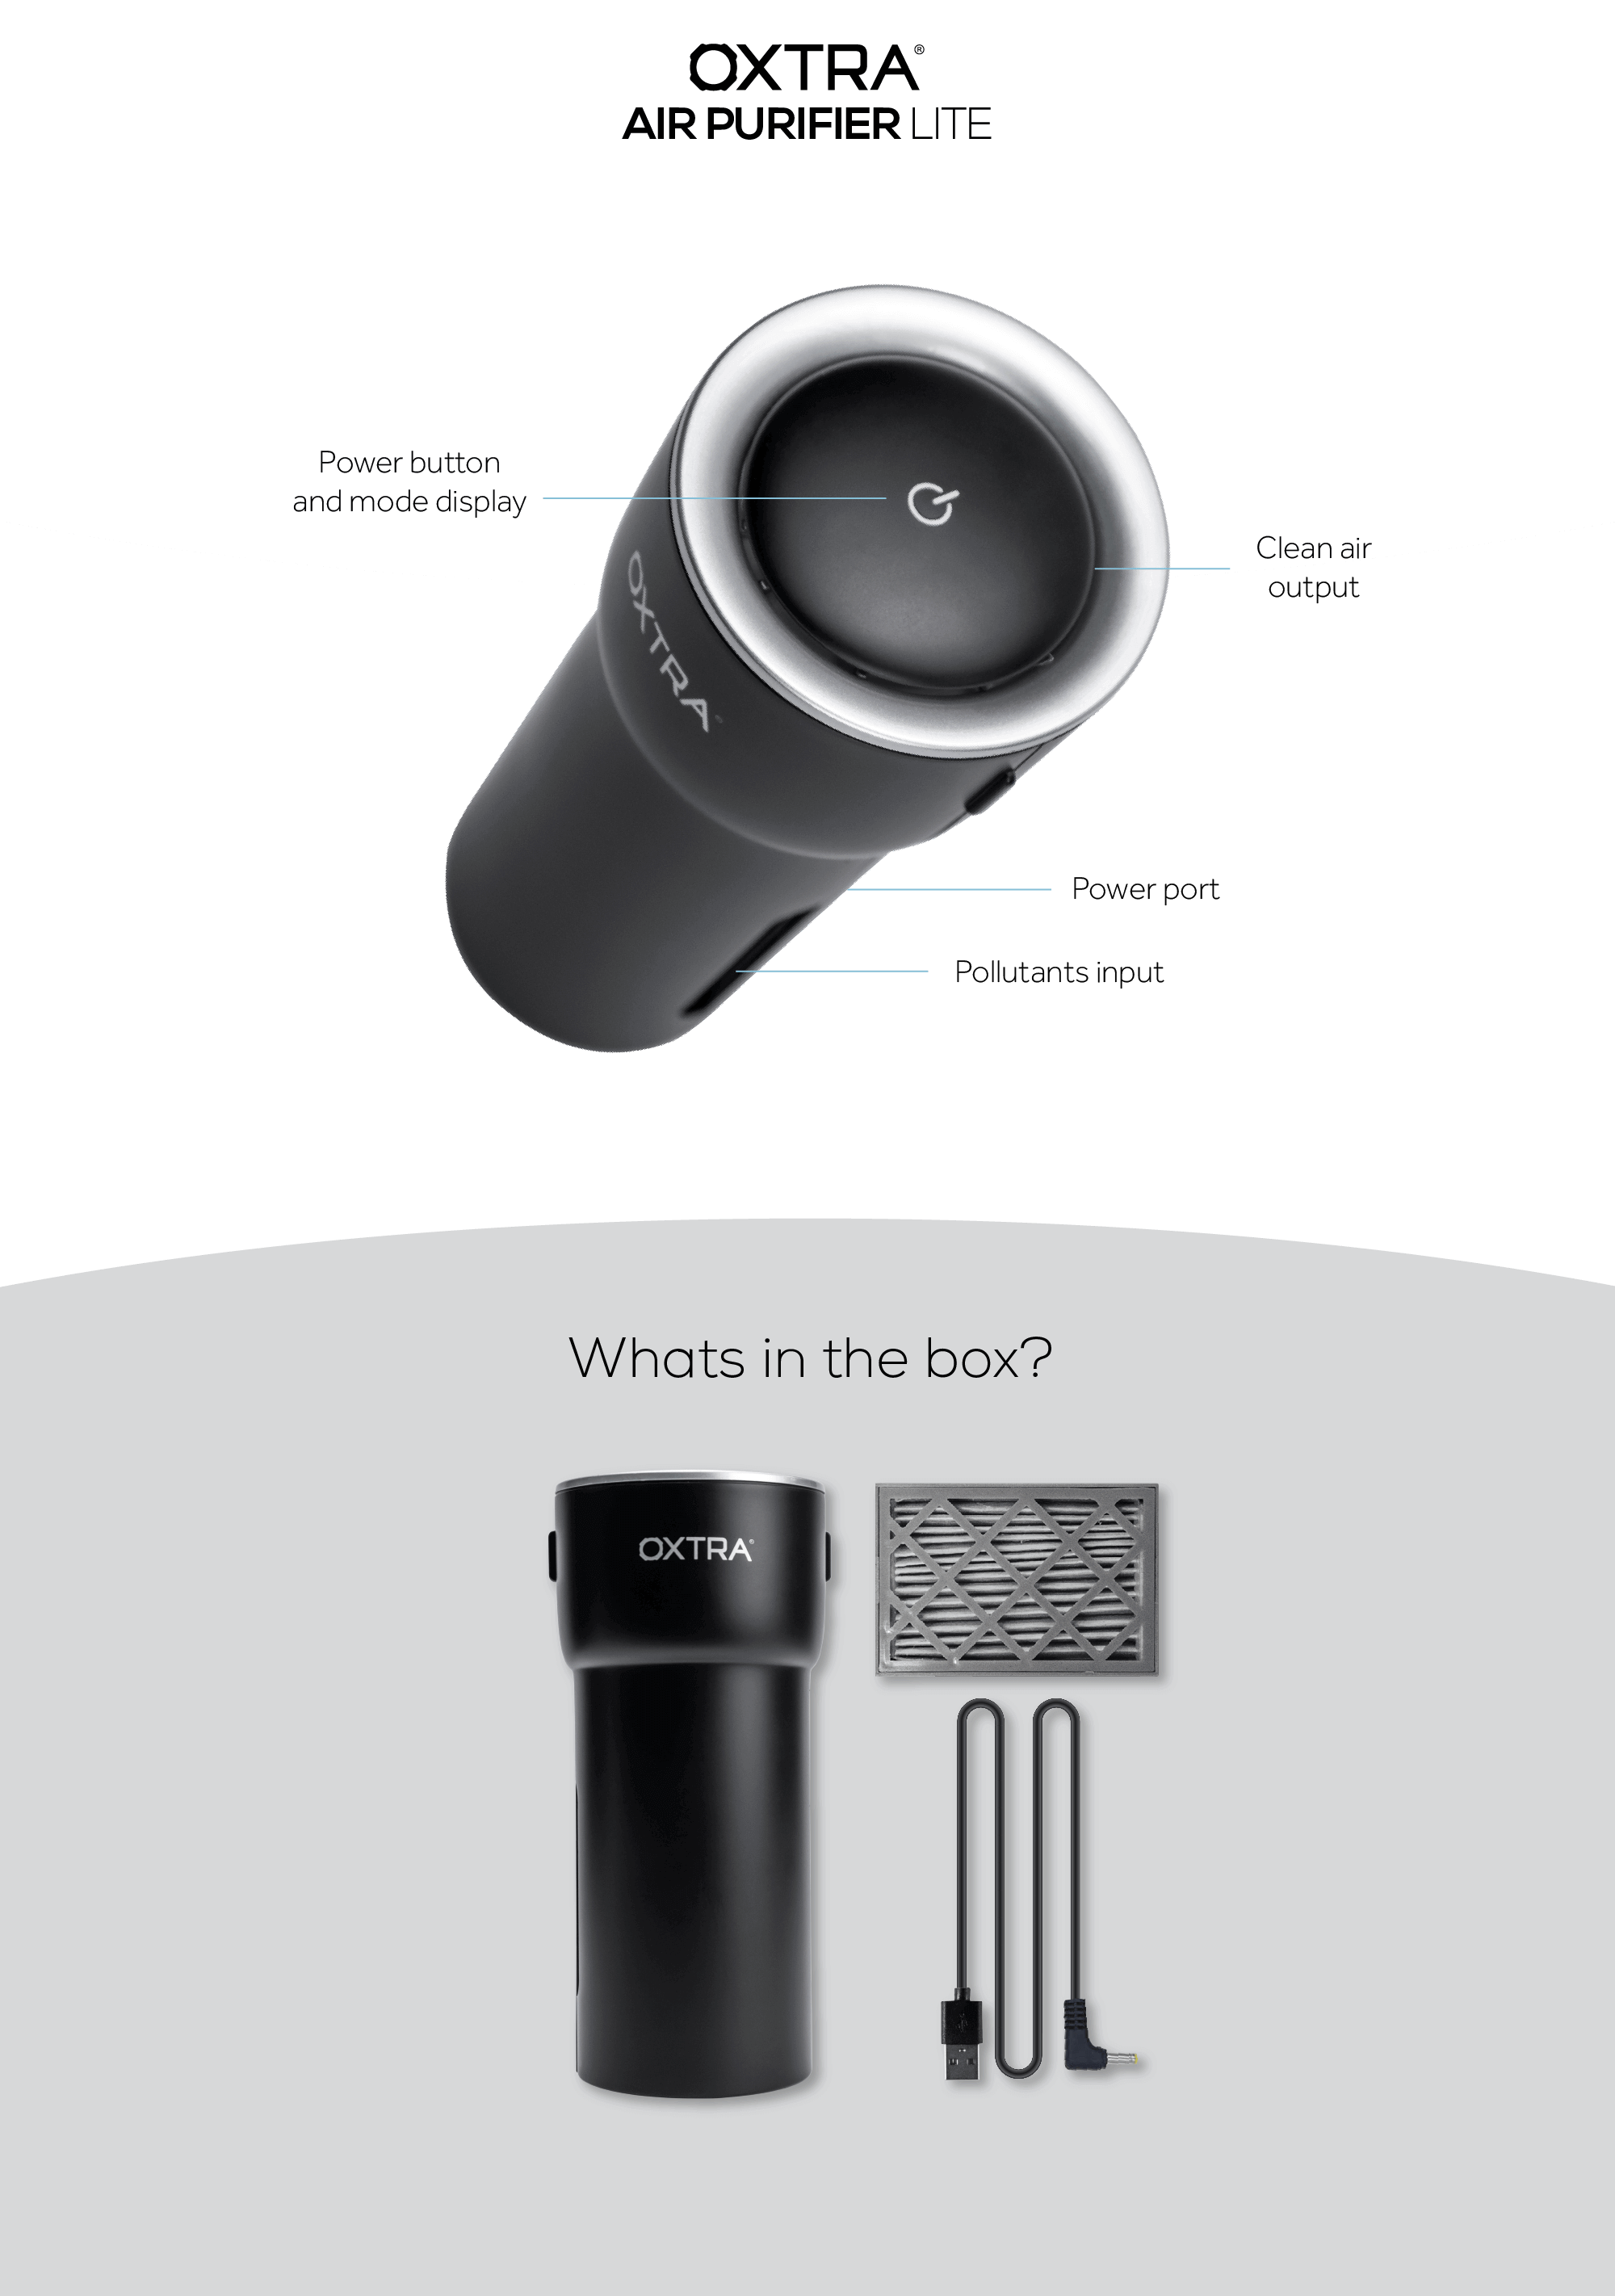 Oxtra Air Purifier Lite. Power button and mode display. Clean air ouput. Power Port. Pollutants input.What in the box? Oxtra Air Purifier Lite. Filter . Cable